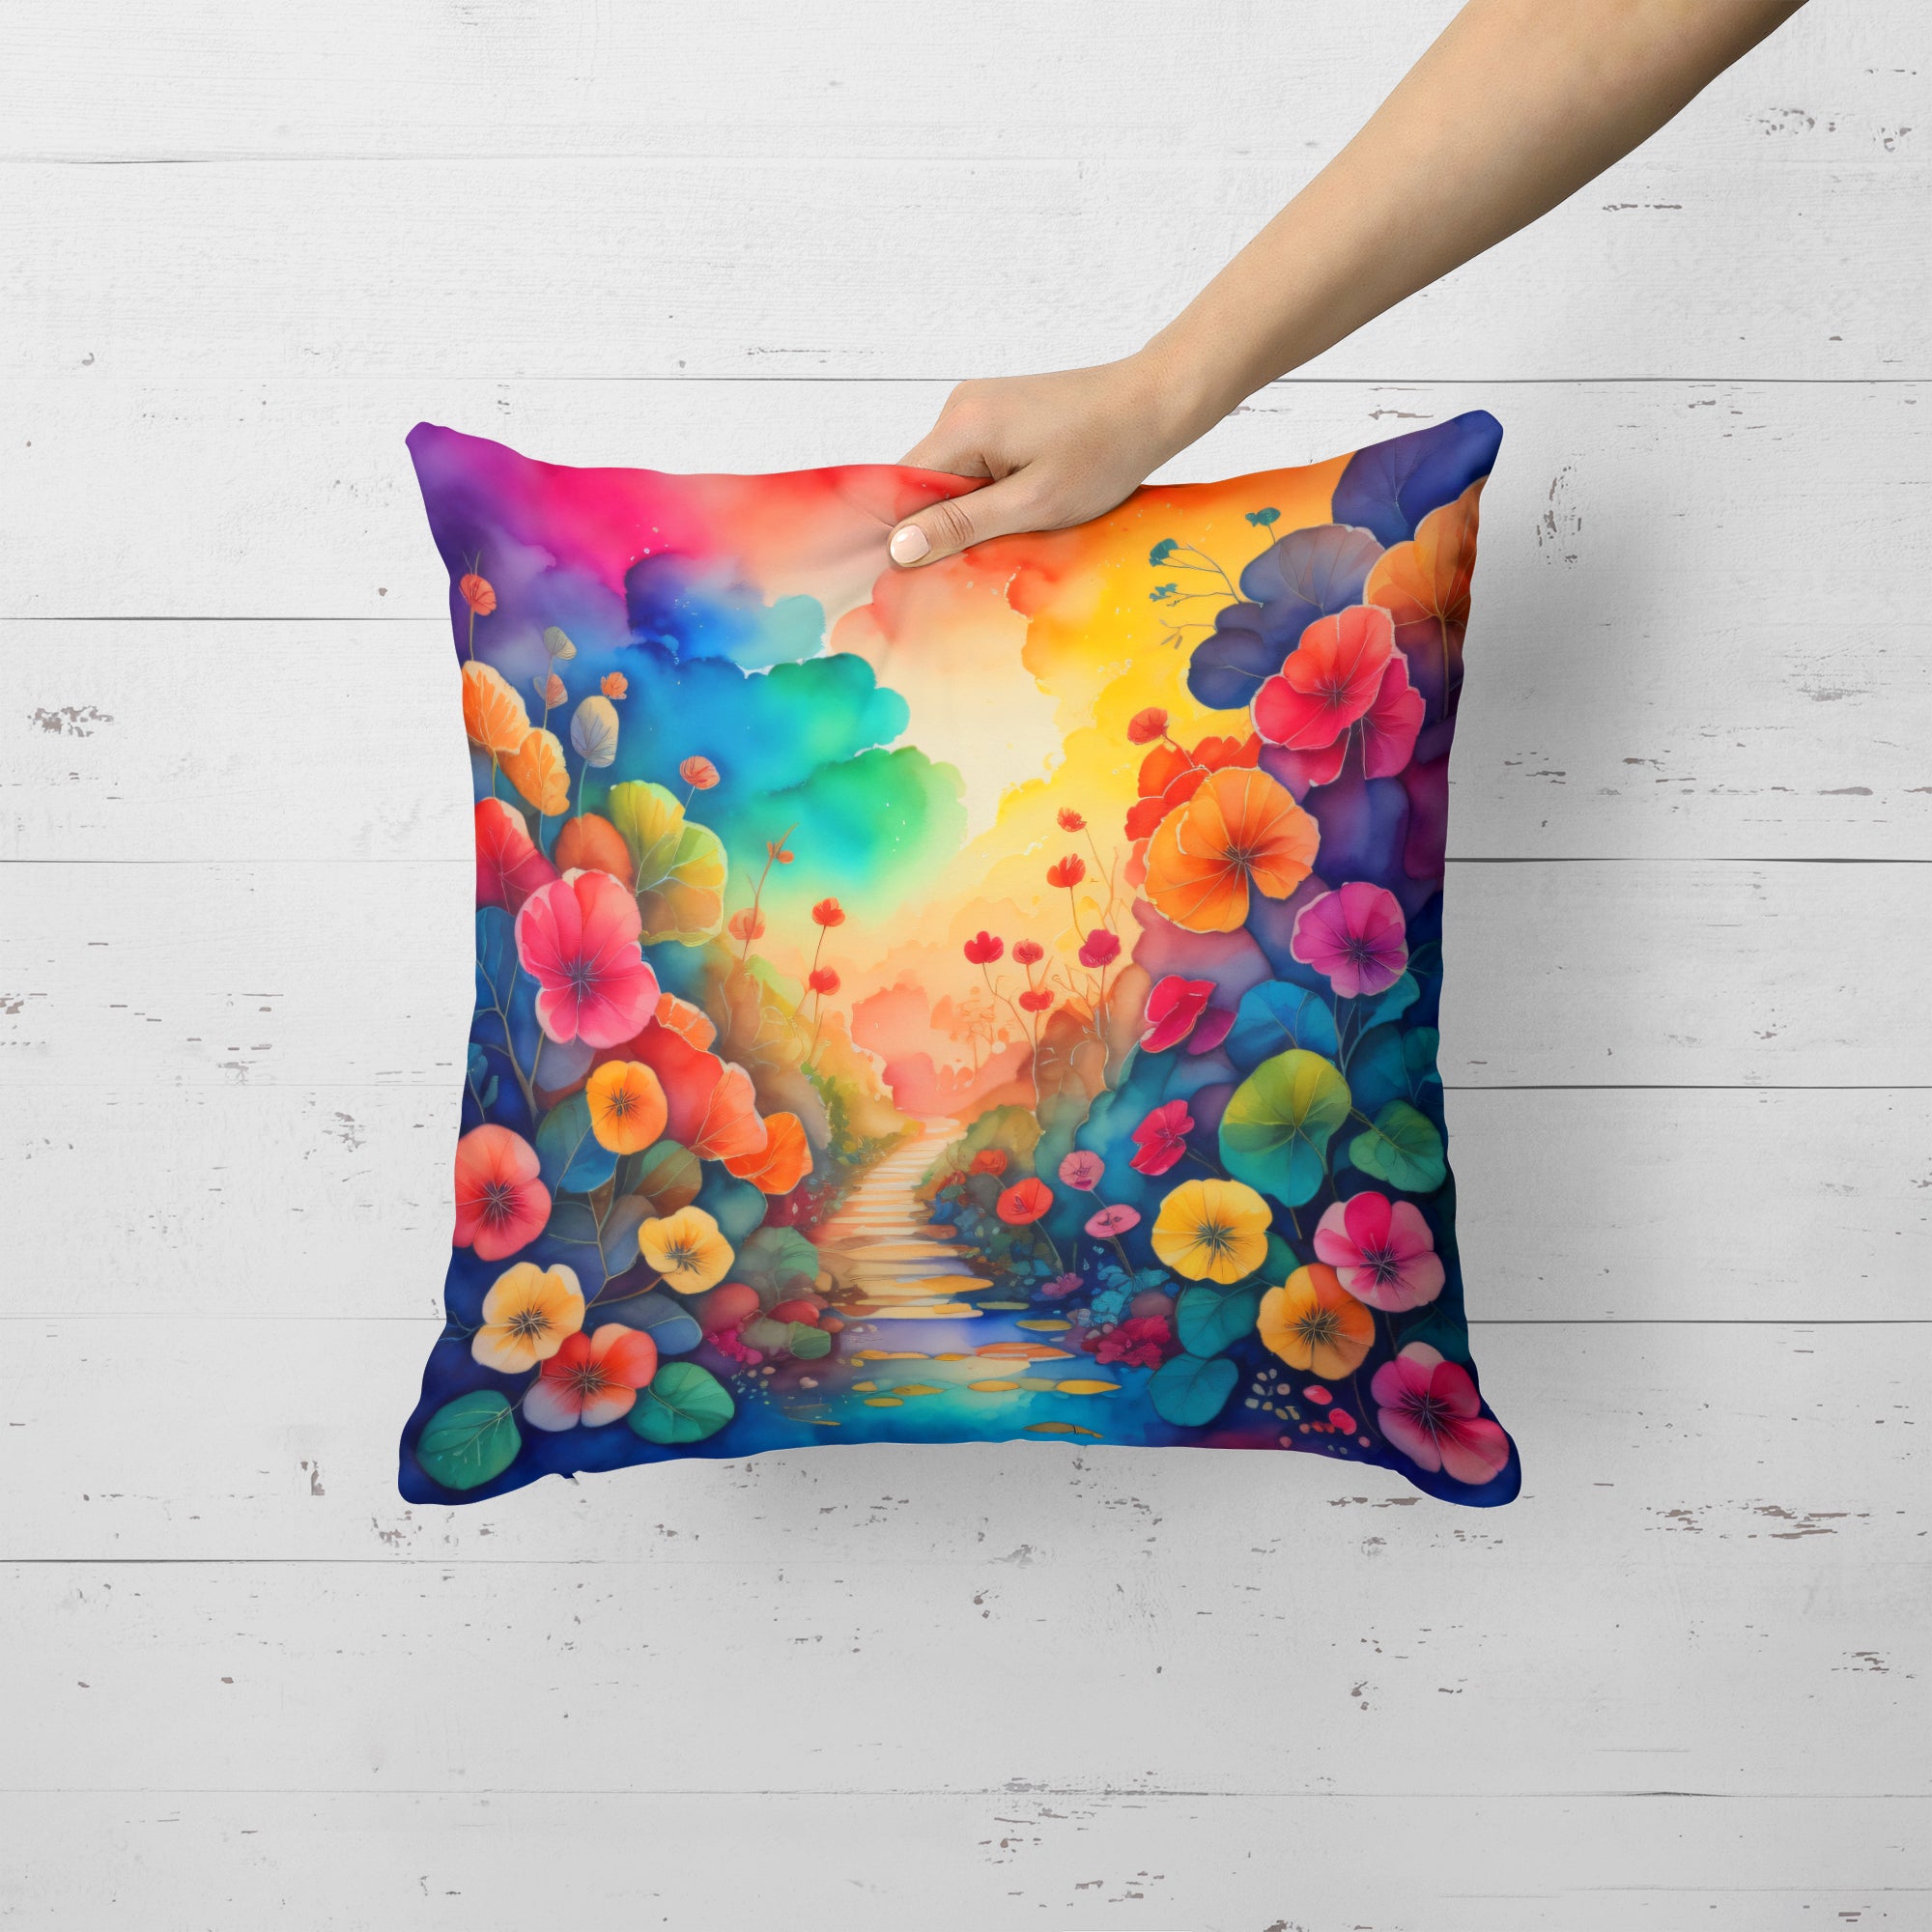 Colorful Begonias Fabric Decorative Pillow